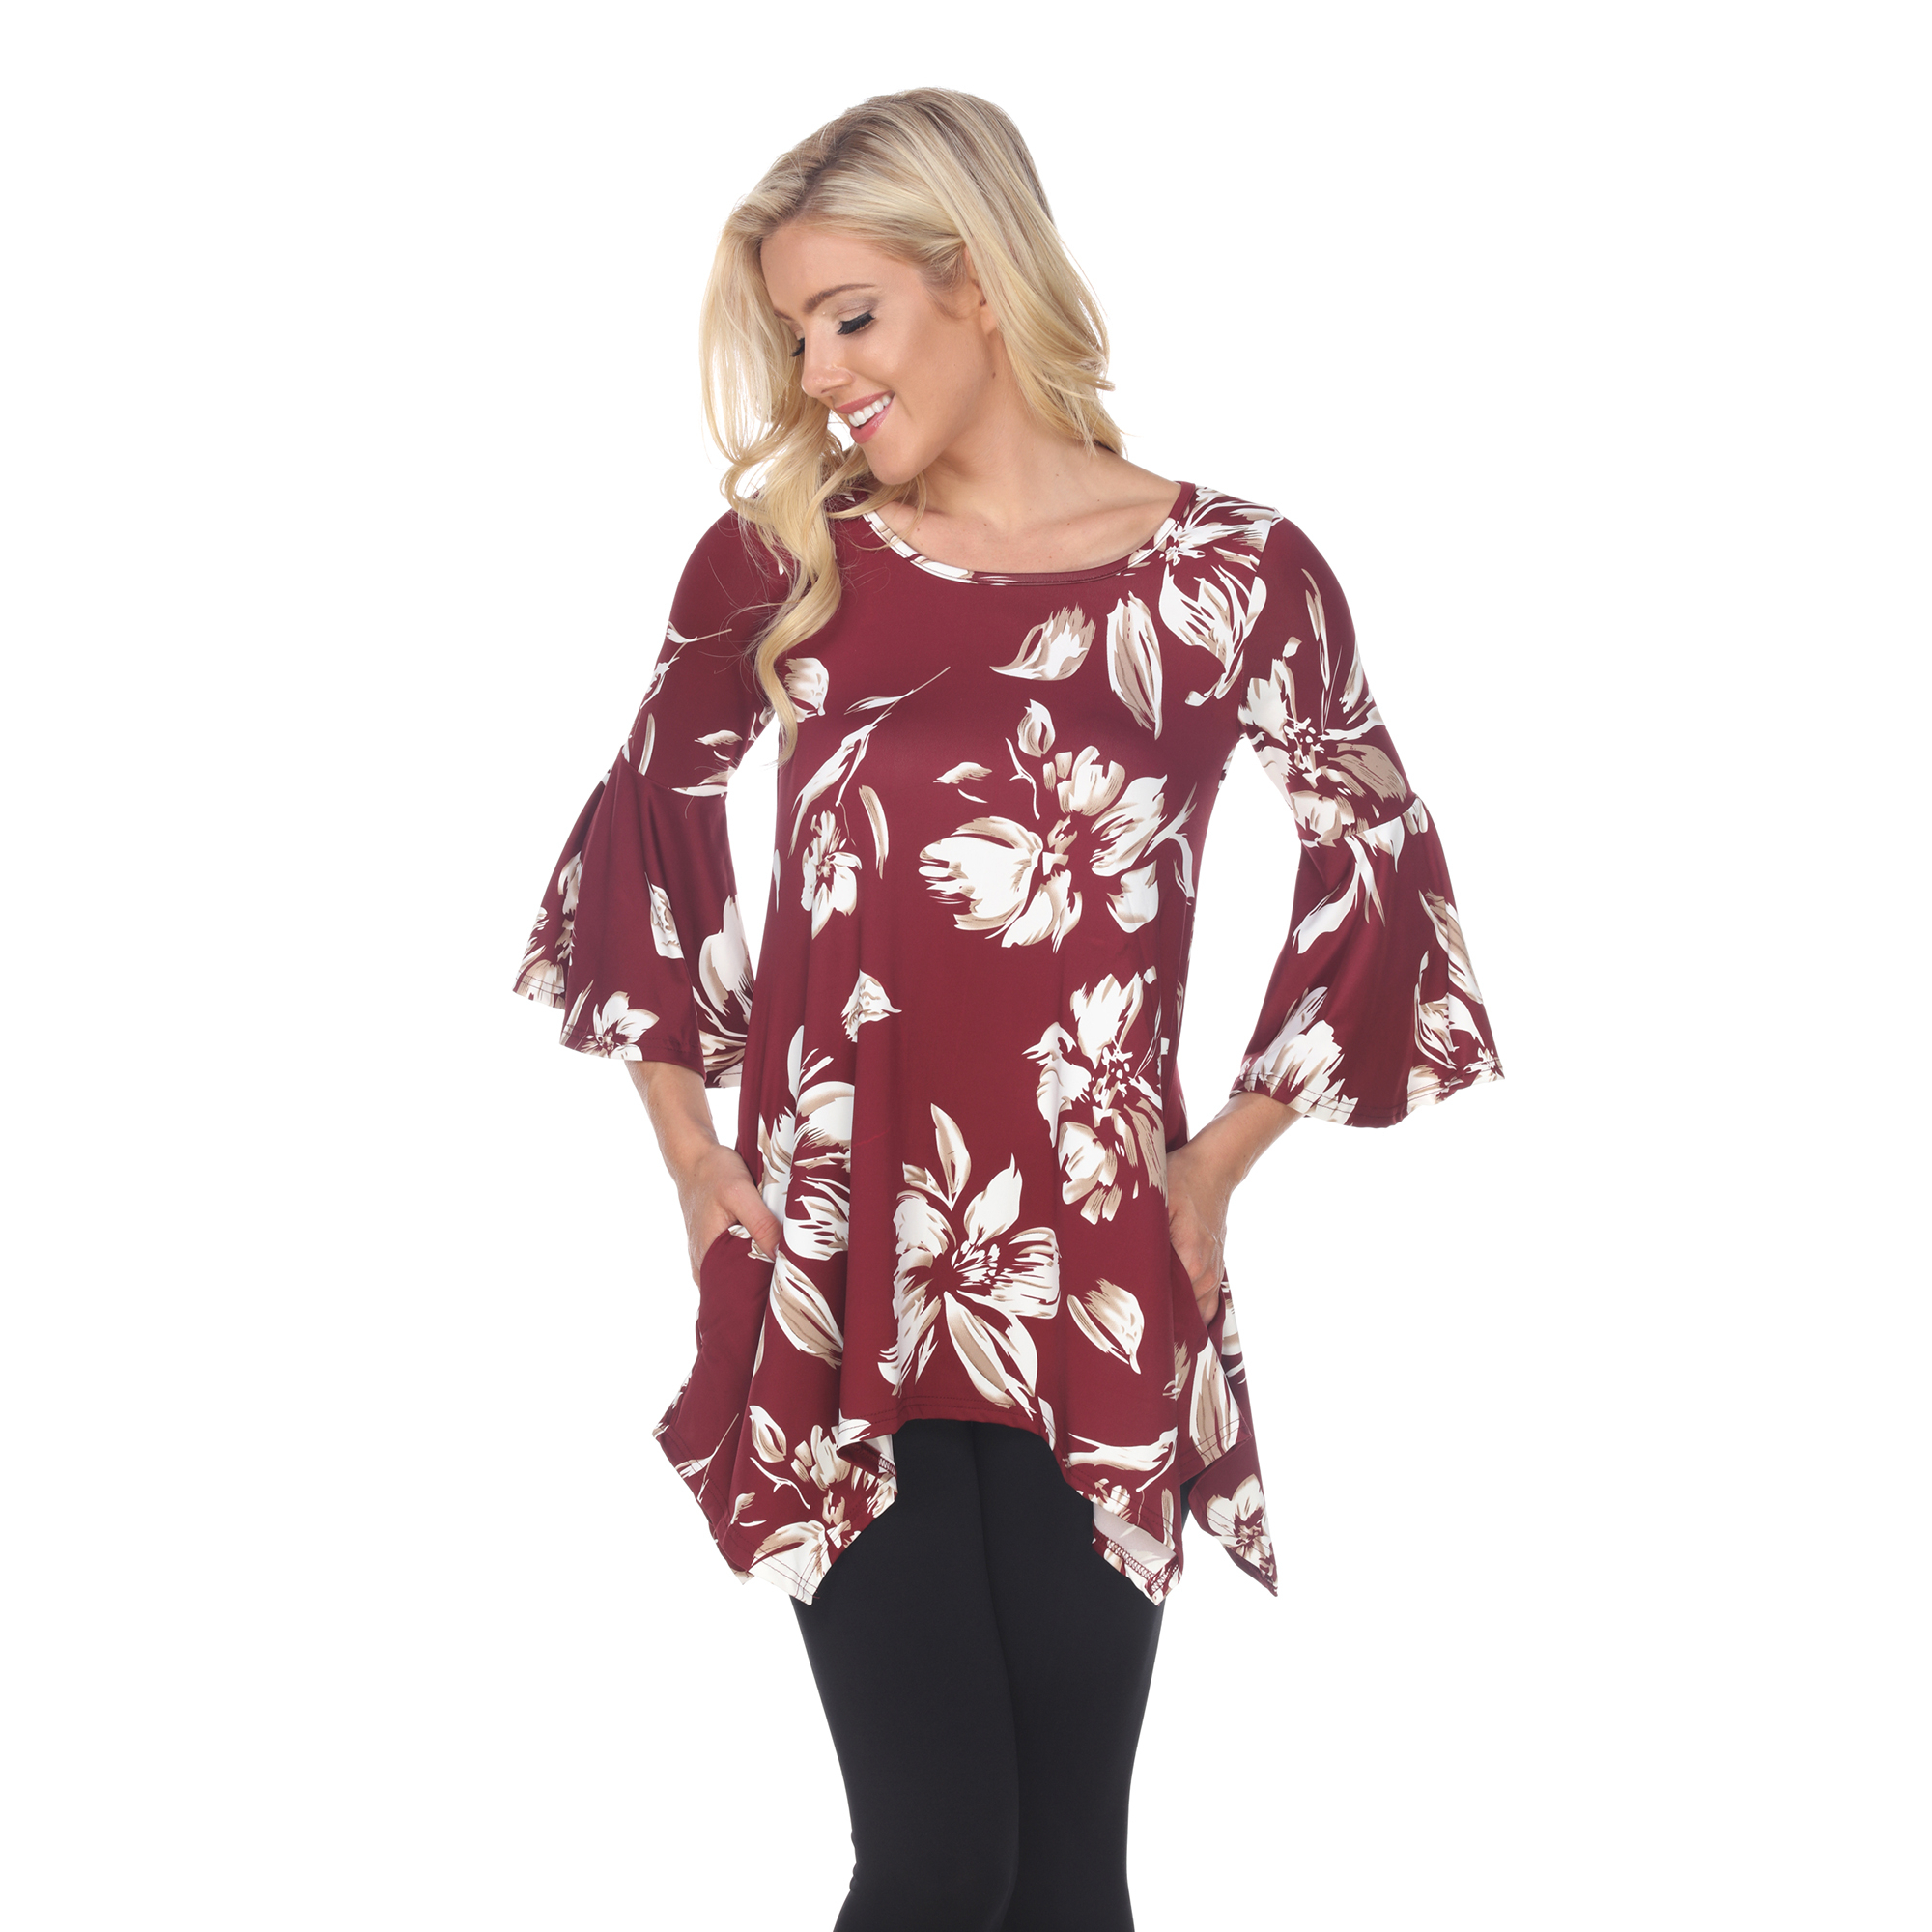 White Mark Women's Floral Print Quarter Sleeve Tunic Top With Pockets - Red, 3X